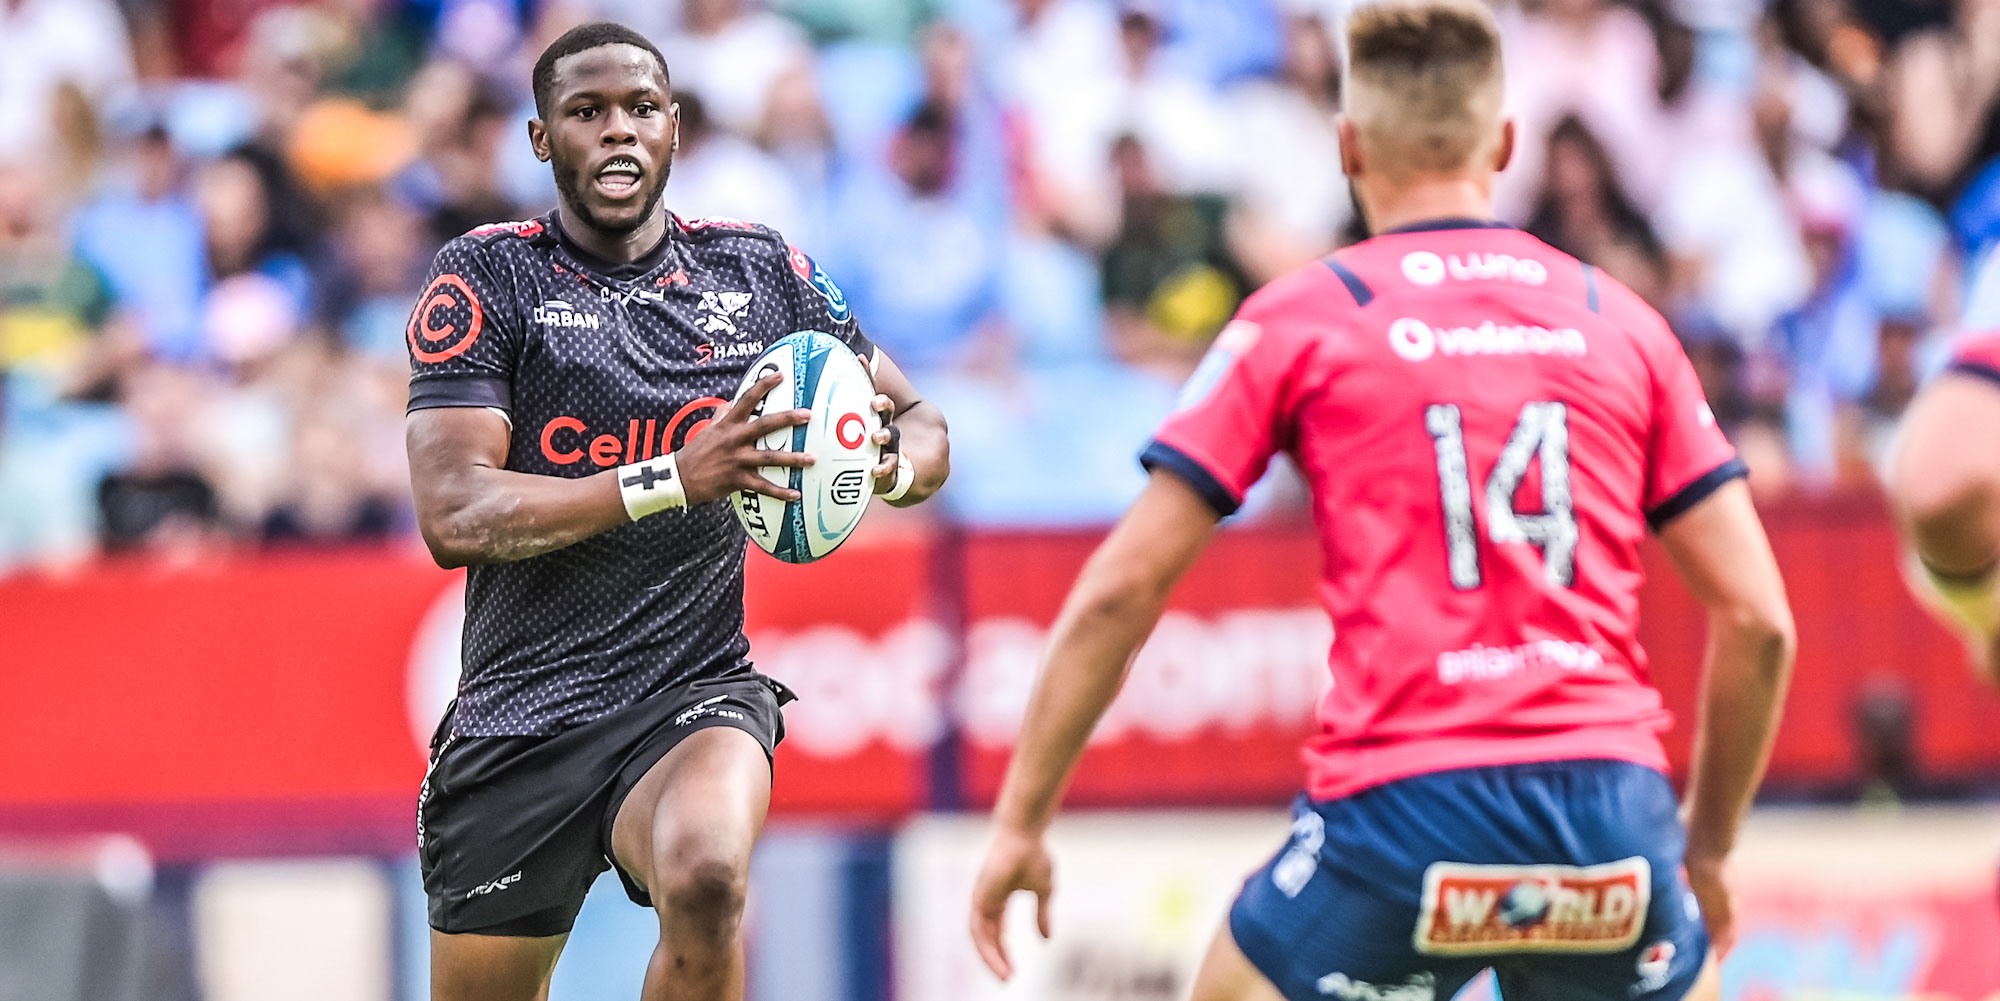 Aphelele Fassi scores one of the Cell C Sharks' three tries at Loftus Versfeld.